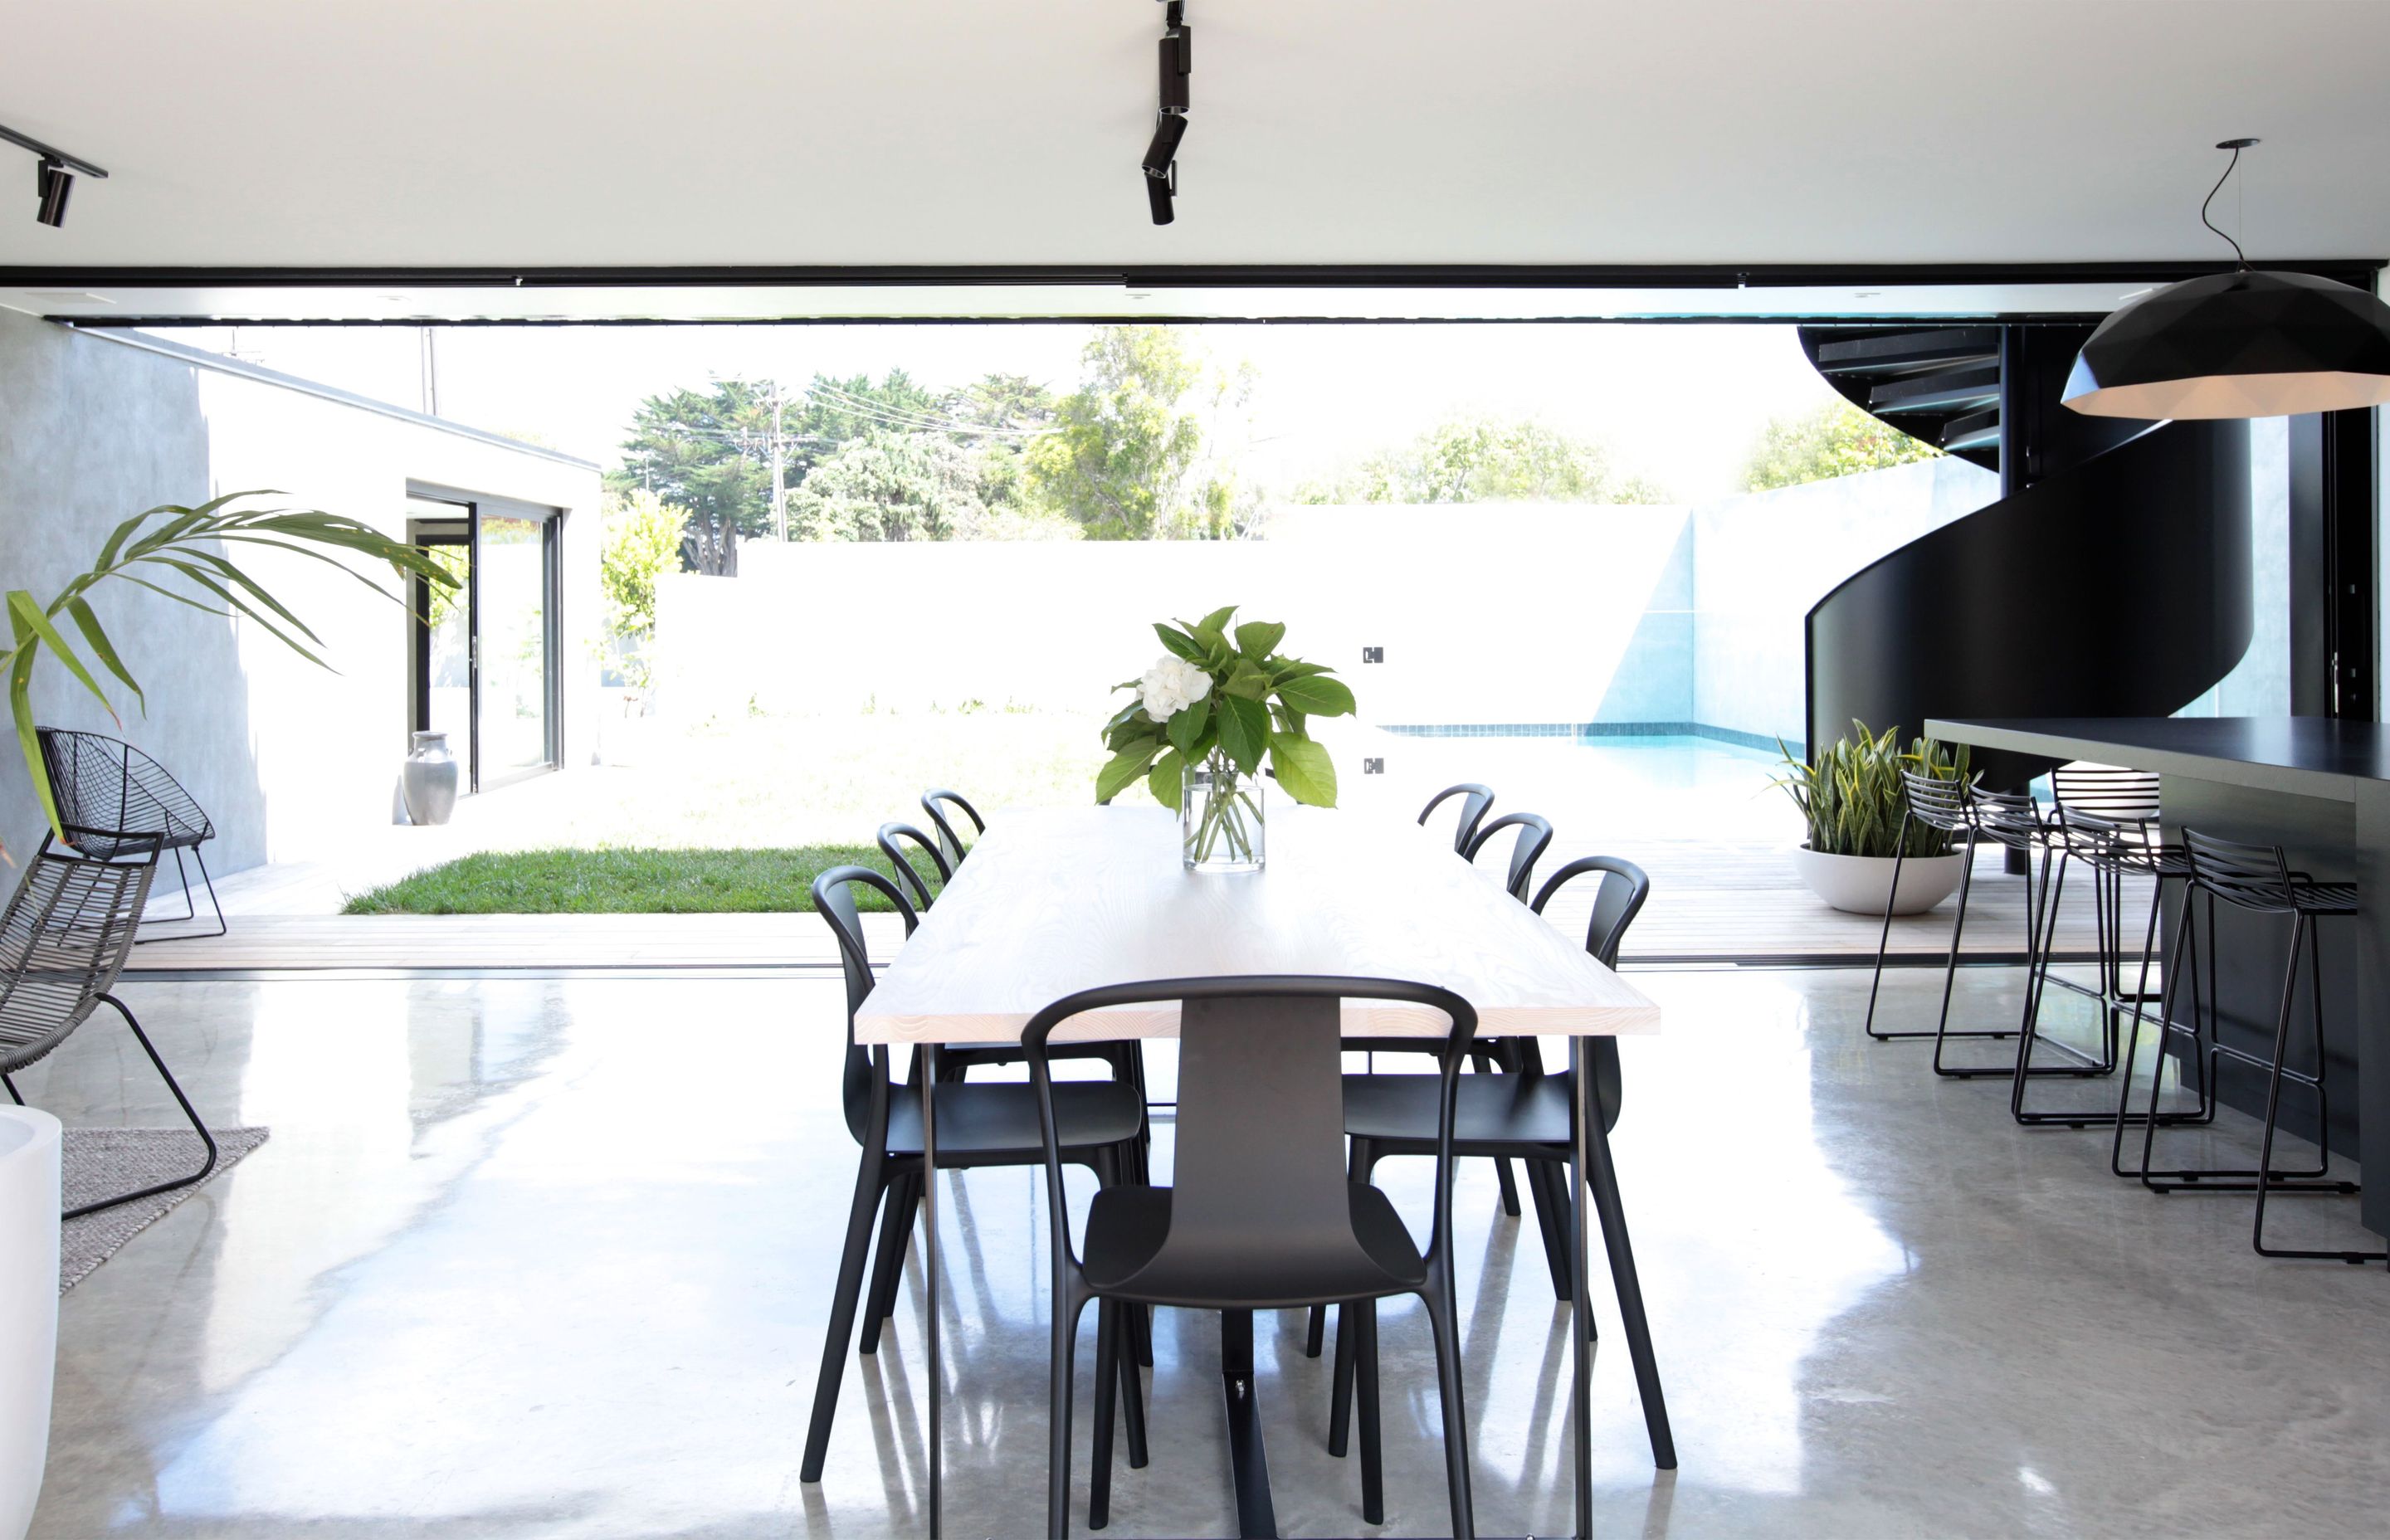 The effect is of light, bright private spaces even though the house is situated on an open corner site in suburban Auckland.